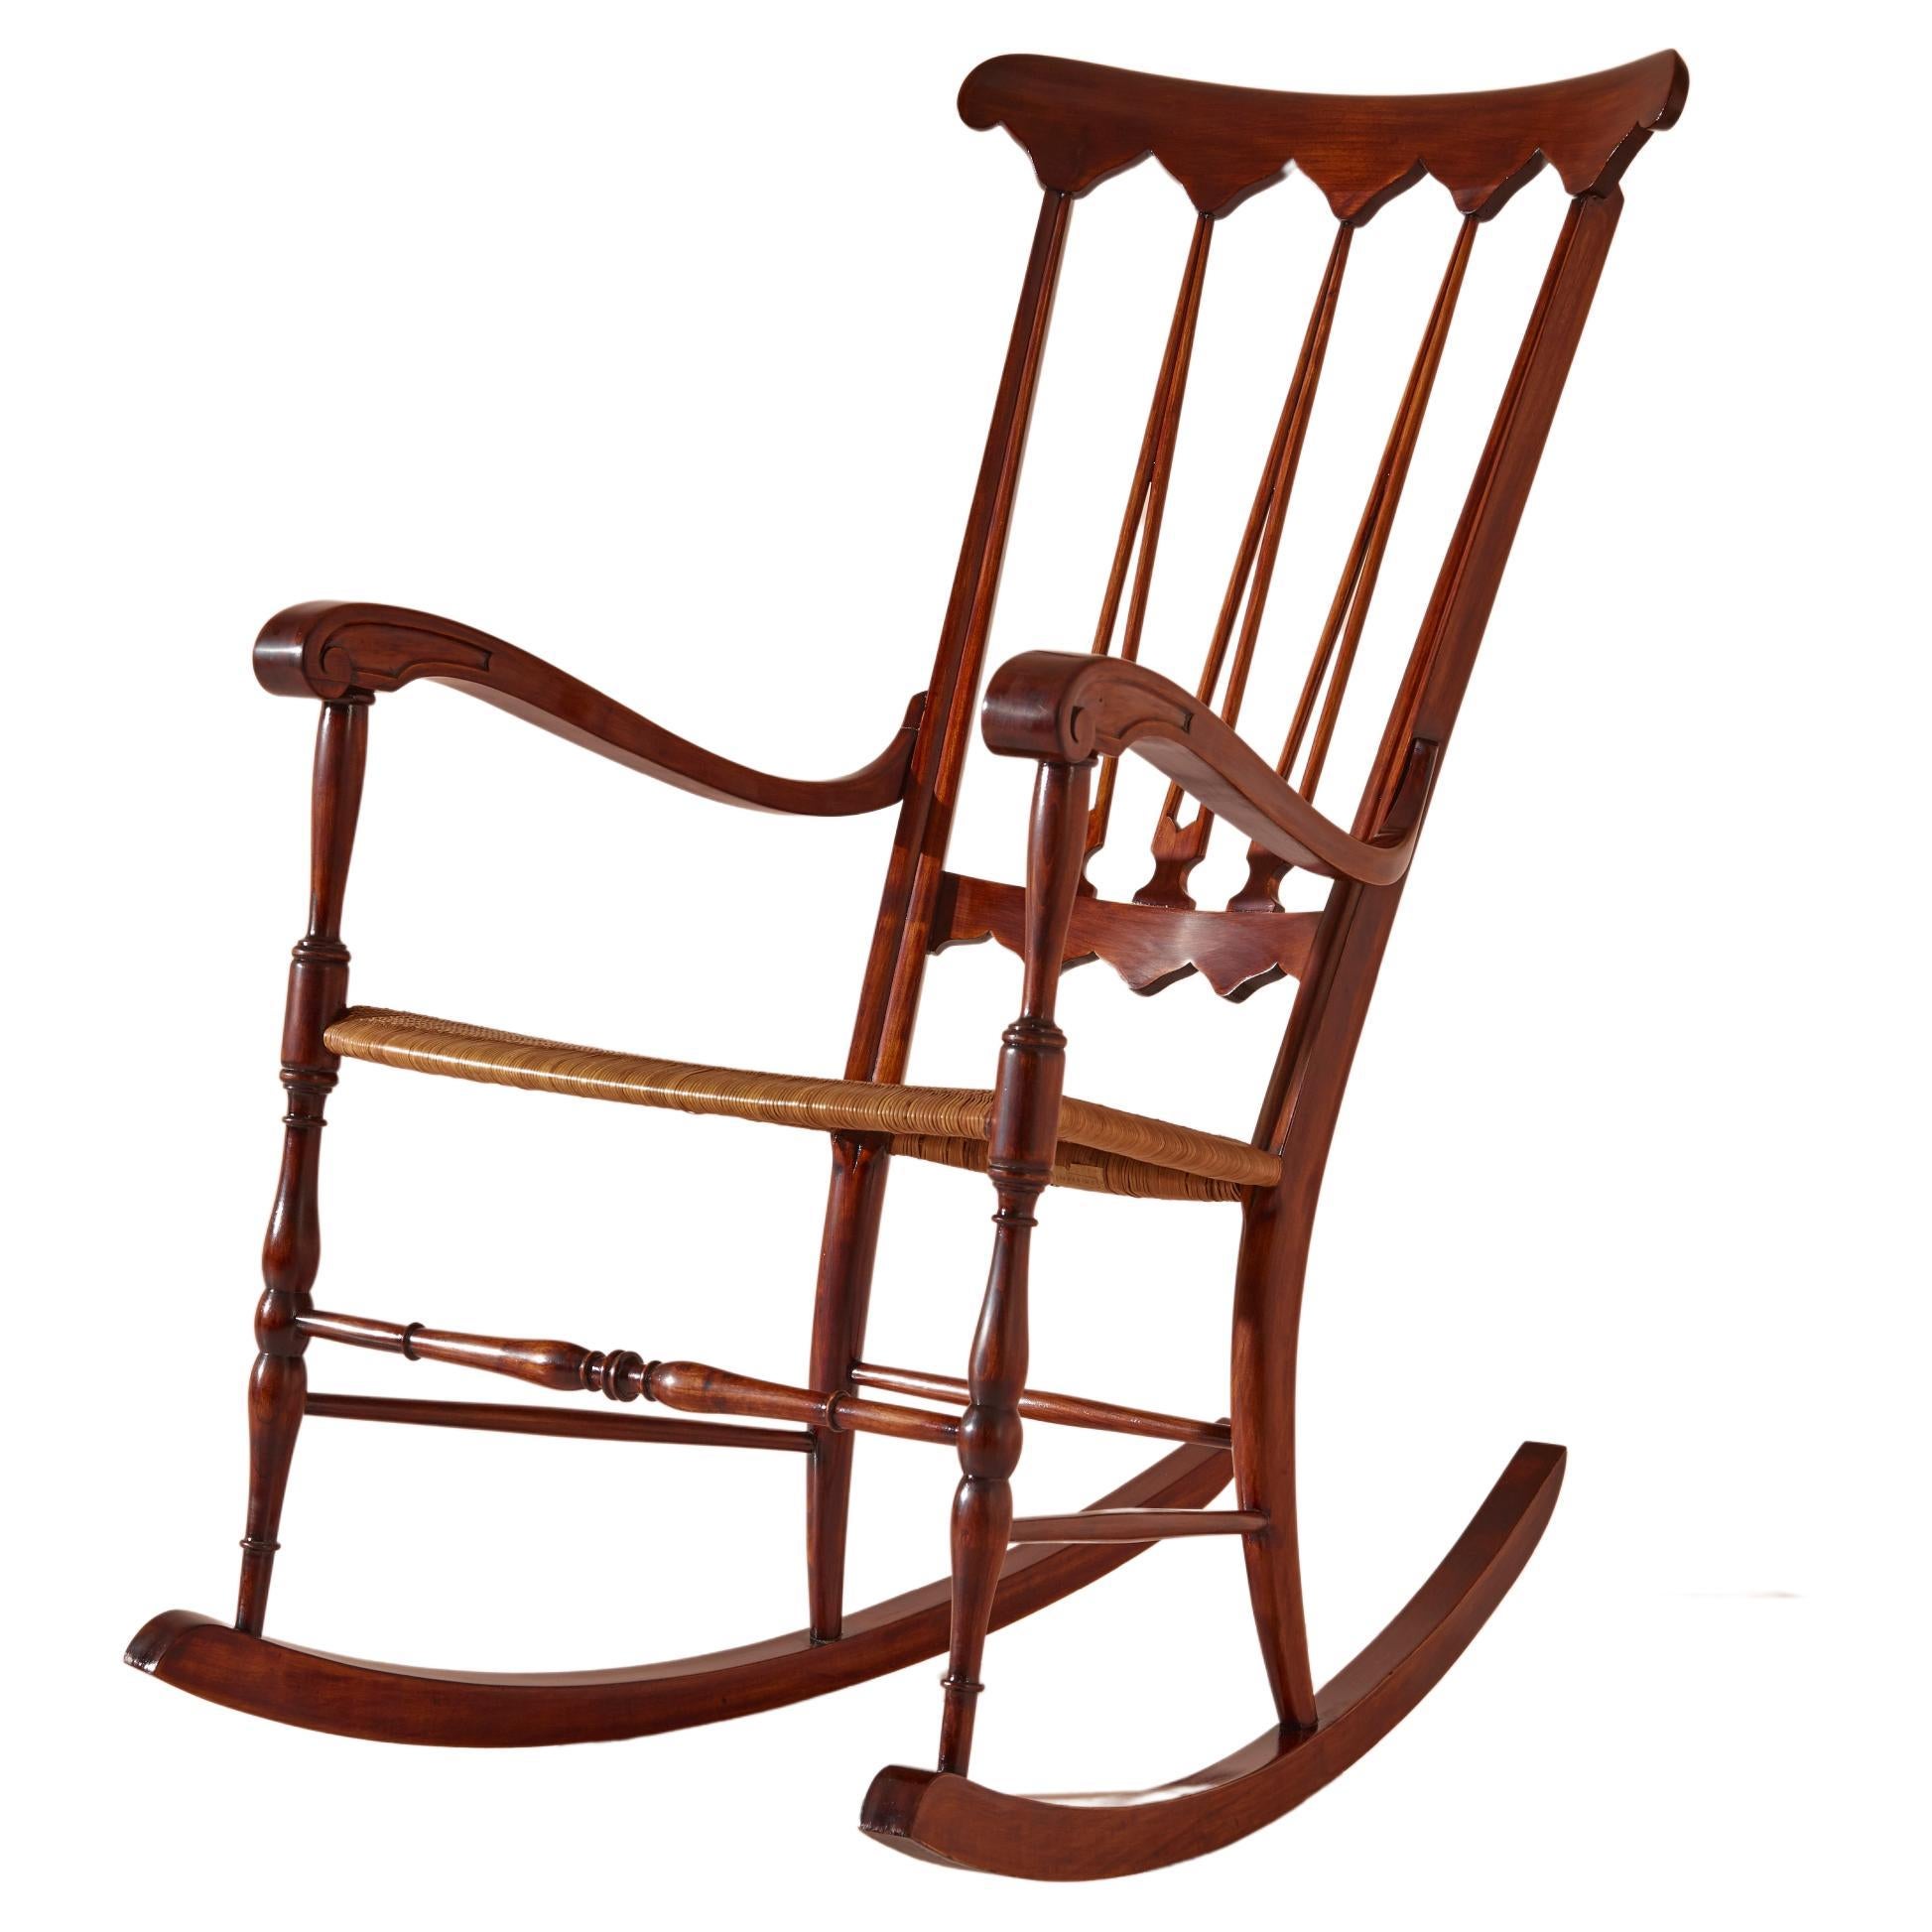 Colombo Sanguineti rocking chair made of beech and woven straw, Chiavari, 1940s For Sale